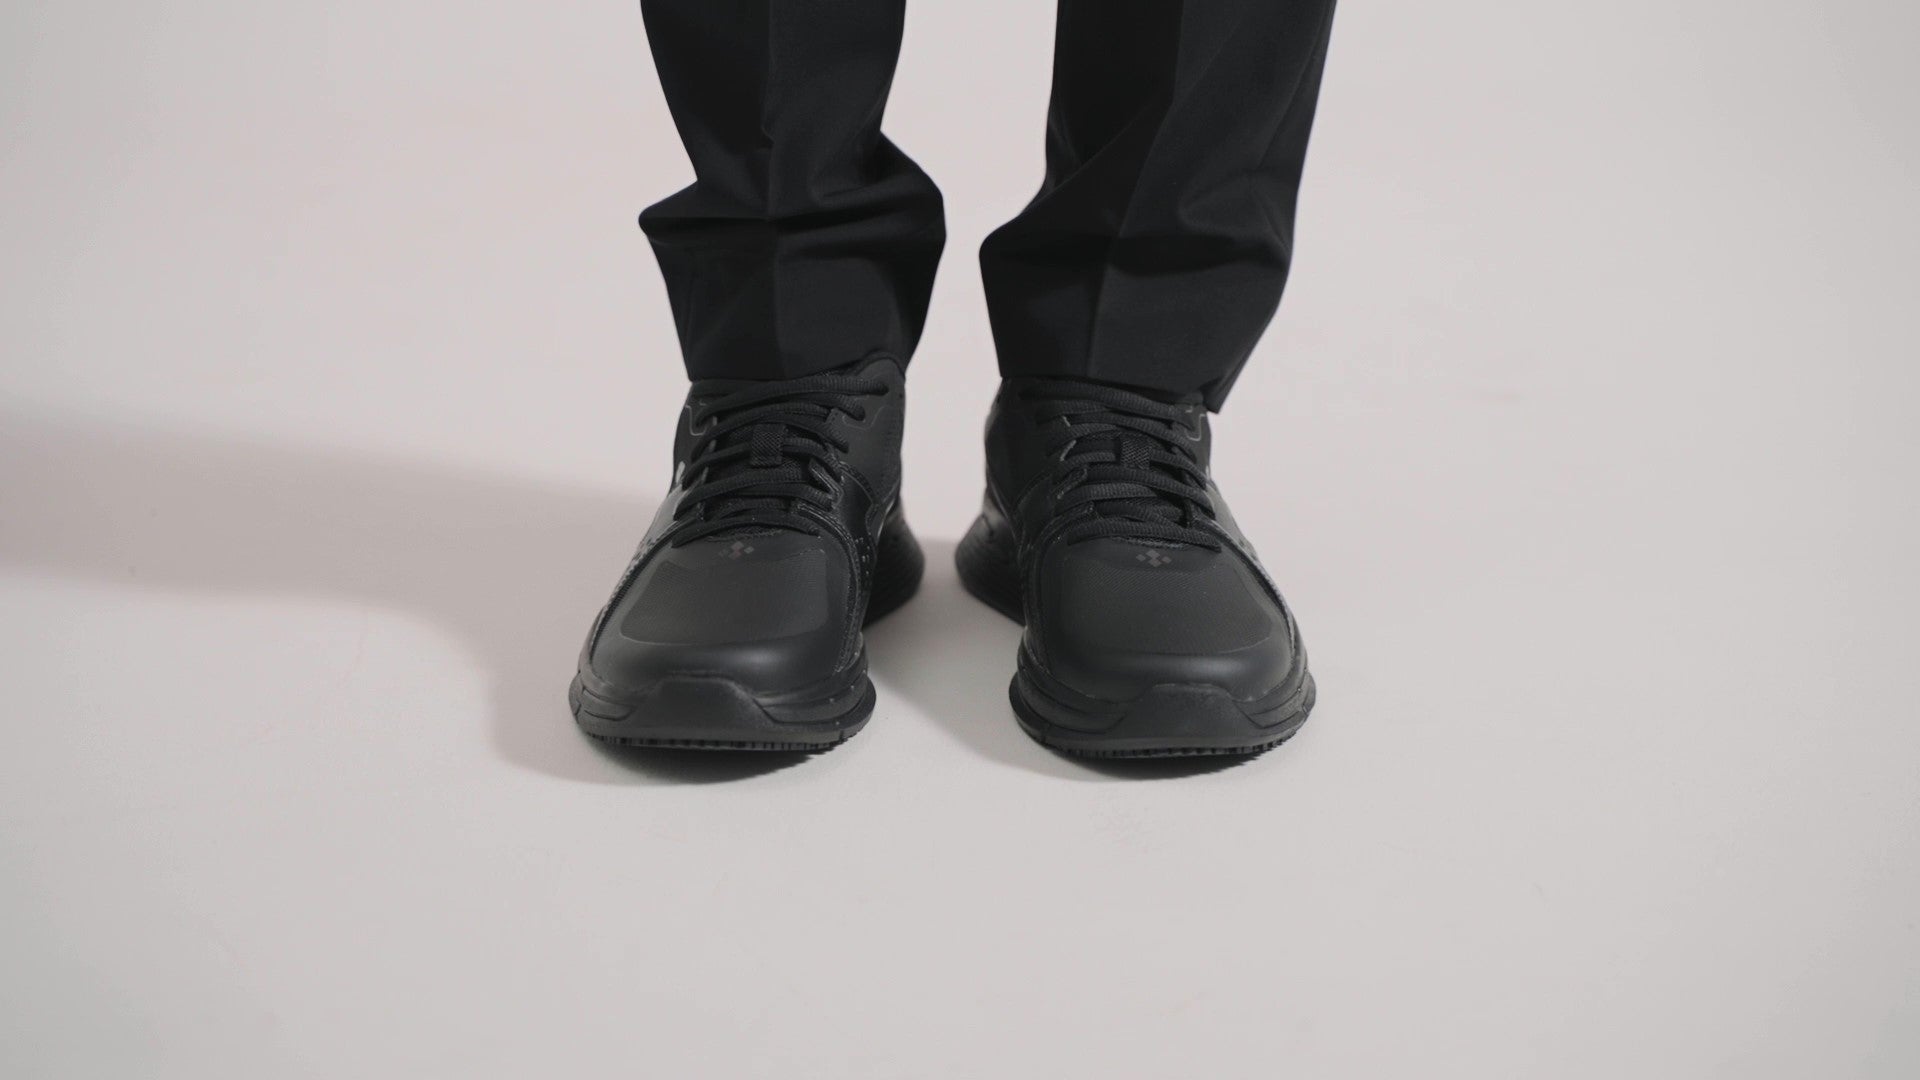 The Condor Men's Black from Shoes for Crews is a slip-resistant shoe with laces, with additional padding and a removable cushioned insole, product video.